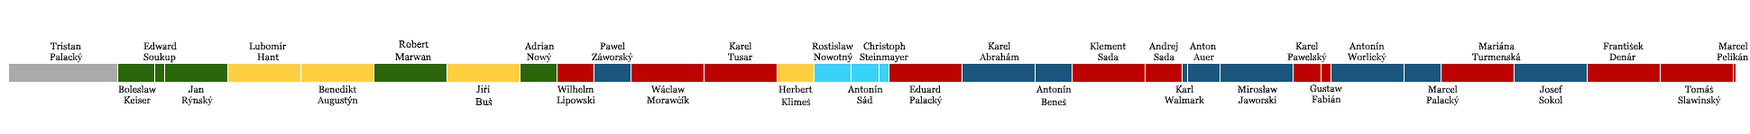 Timeline depicting progression of presidents and their political affiliation based on commonly used colour.